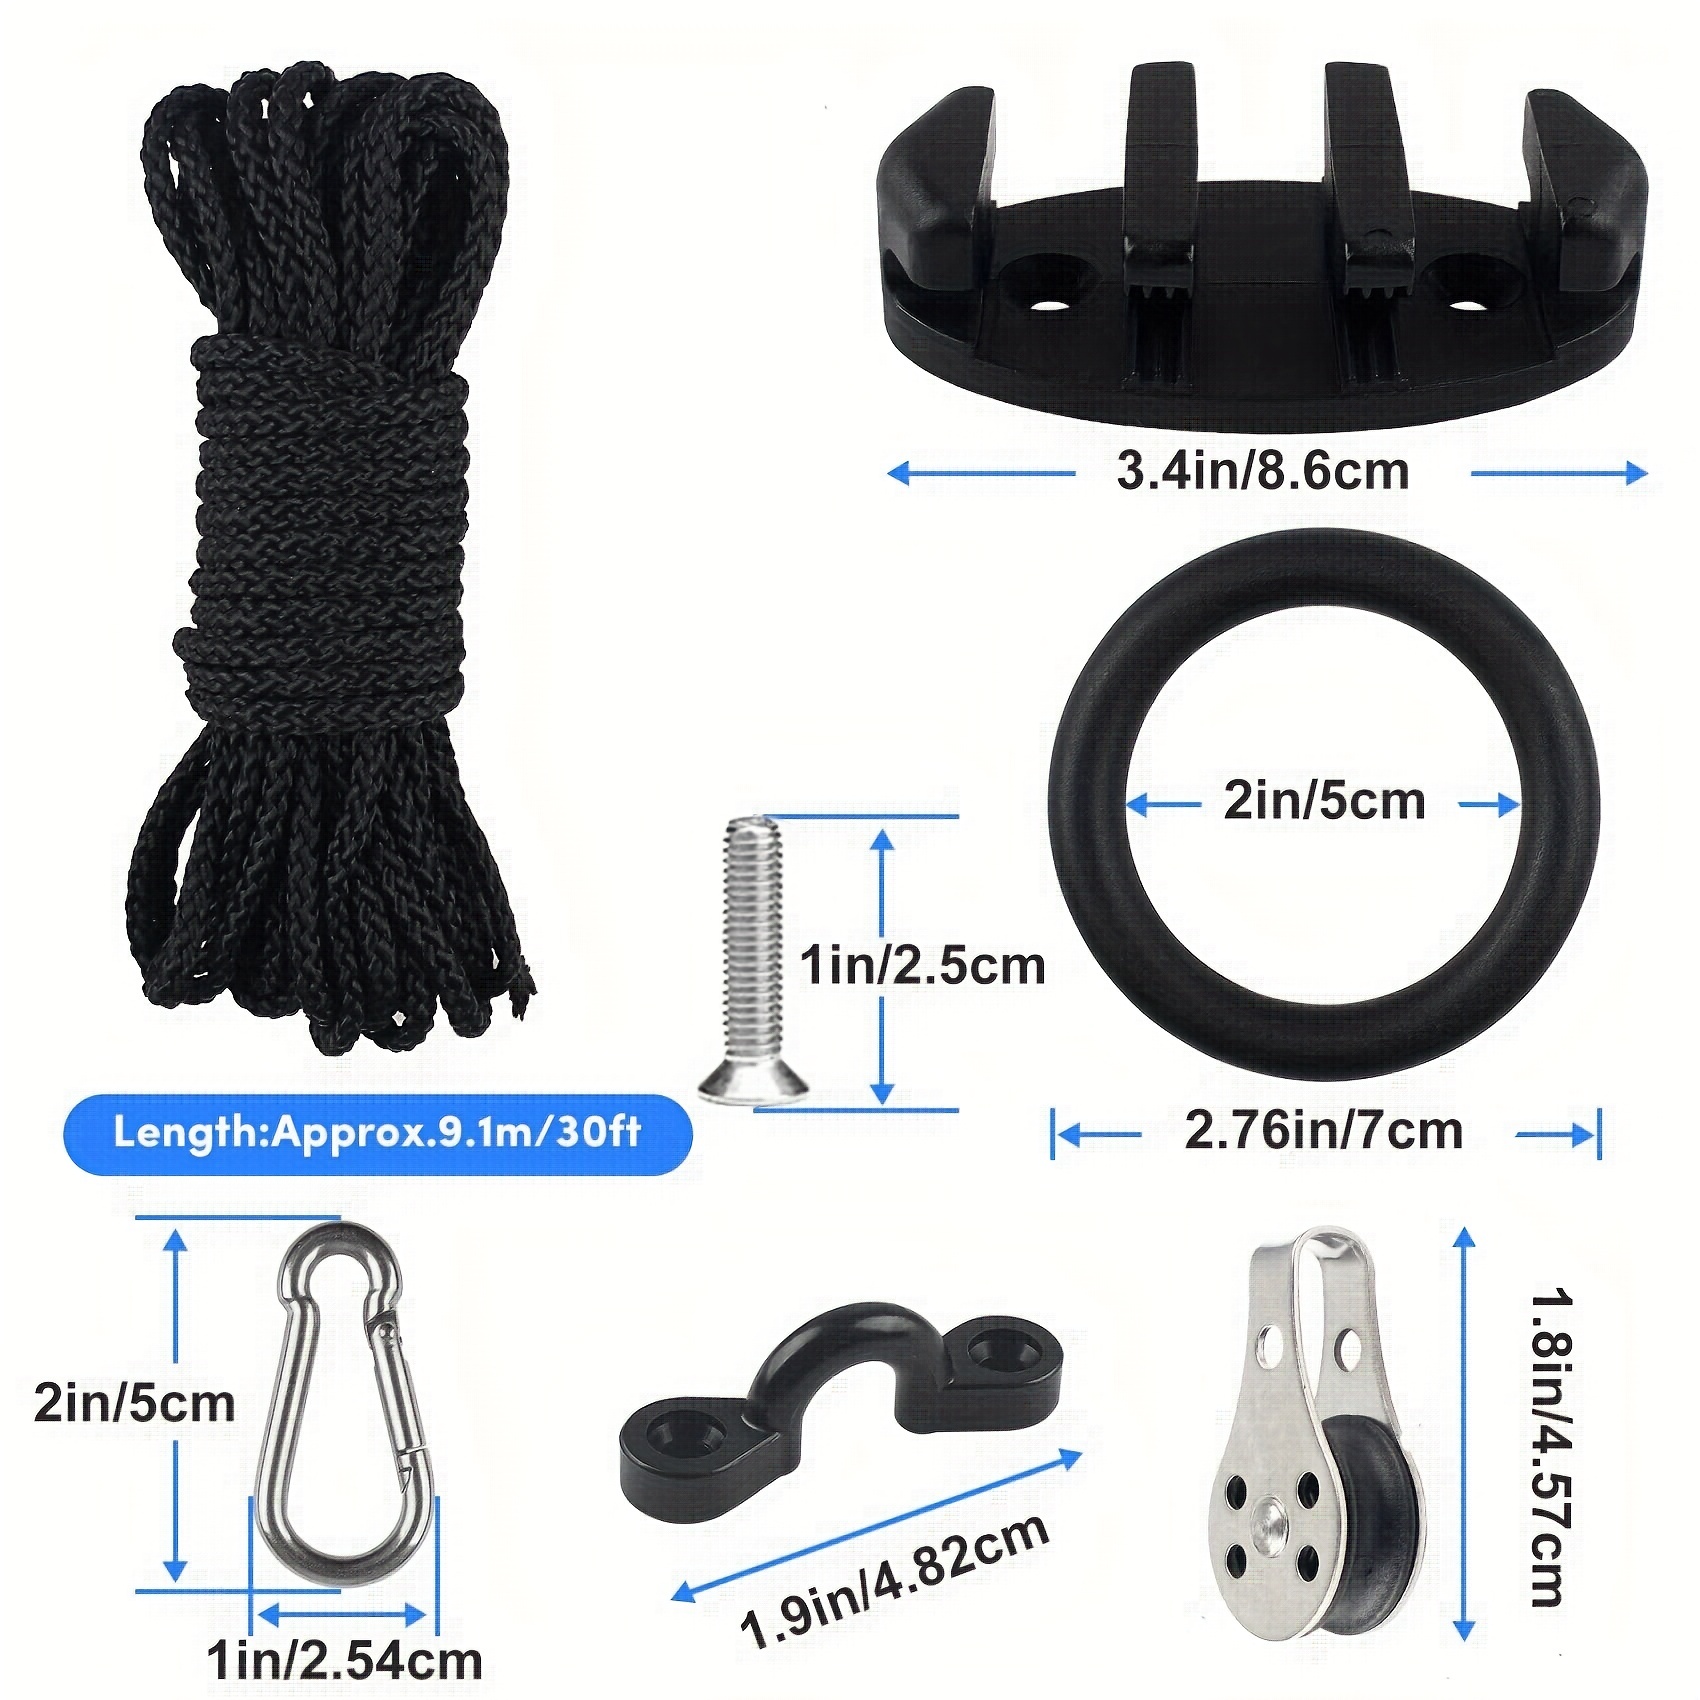 Marine Boats Rope Guide Swivel Anchor Lock Anchor Reel Lock Kayak Canoe  Side Ceiling Mount Rope Roller Lift Pulley Locking Kits